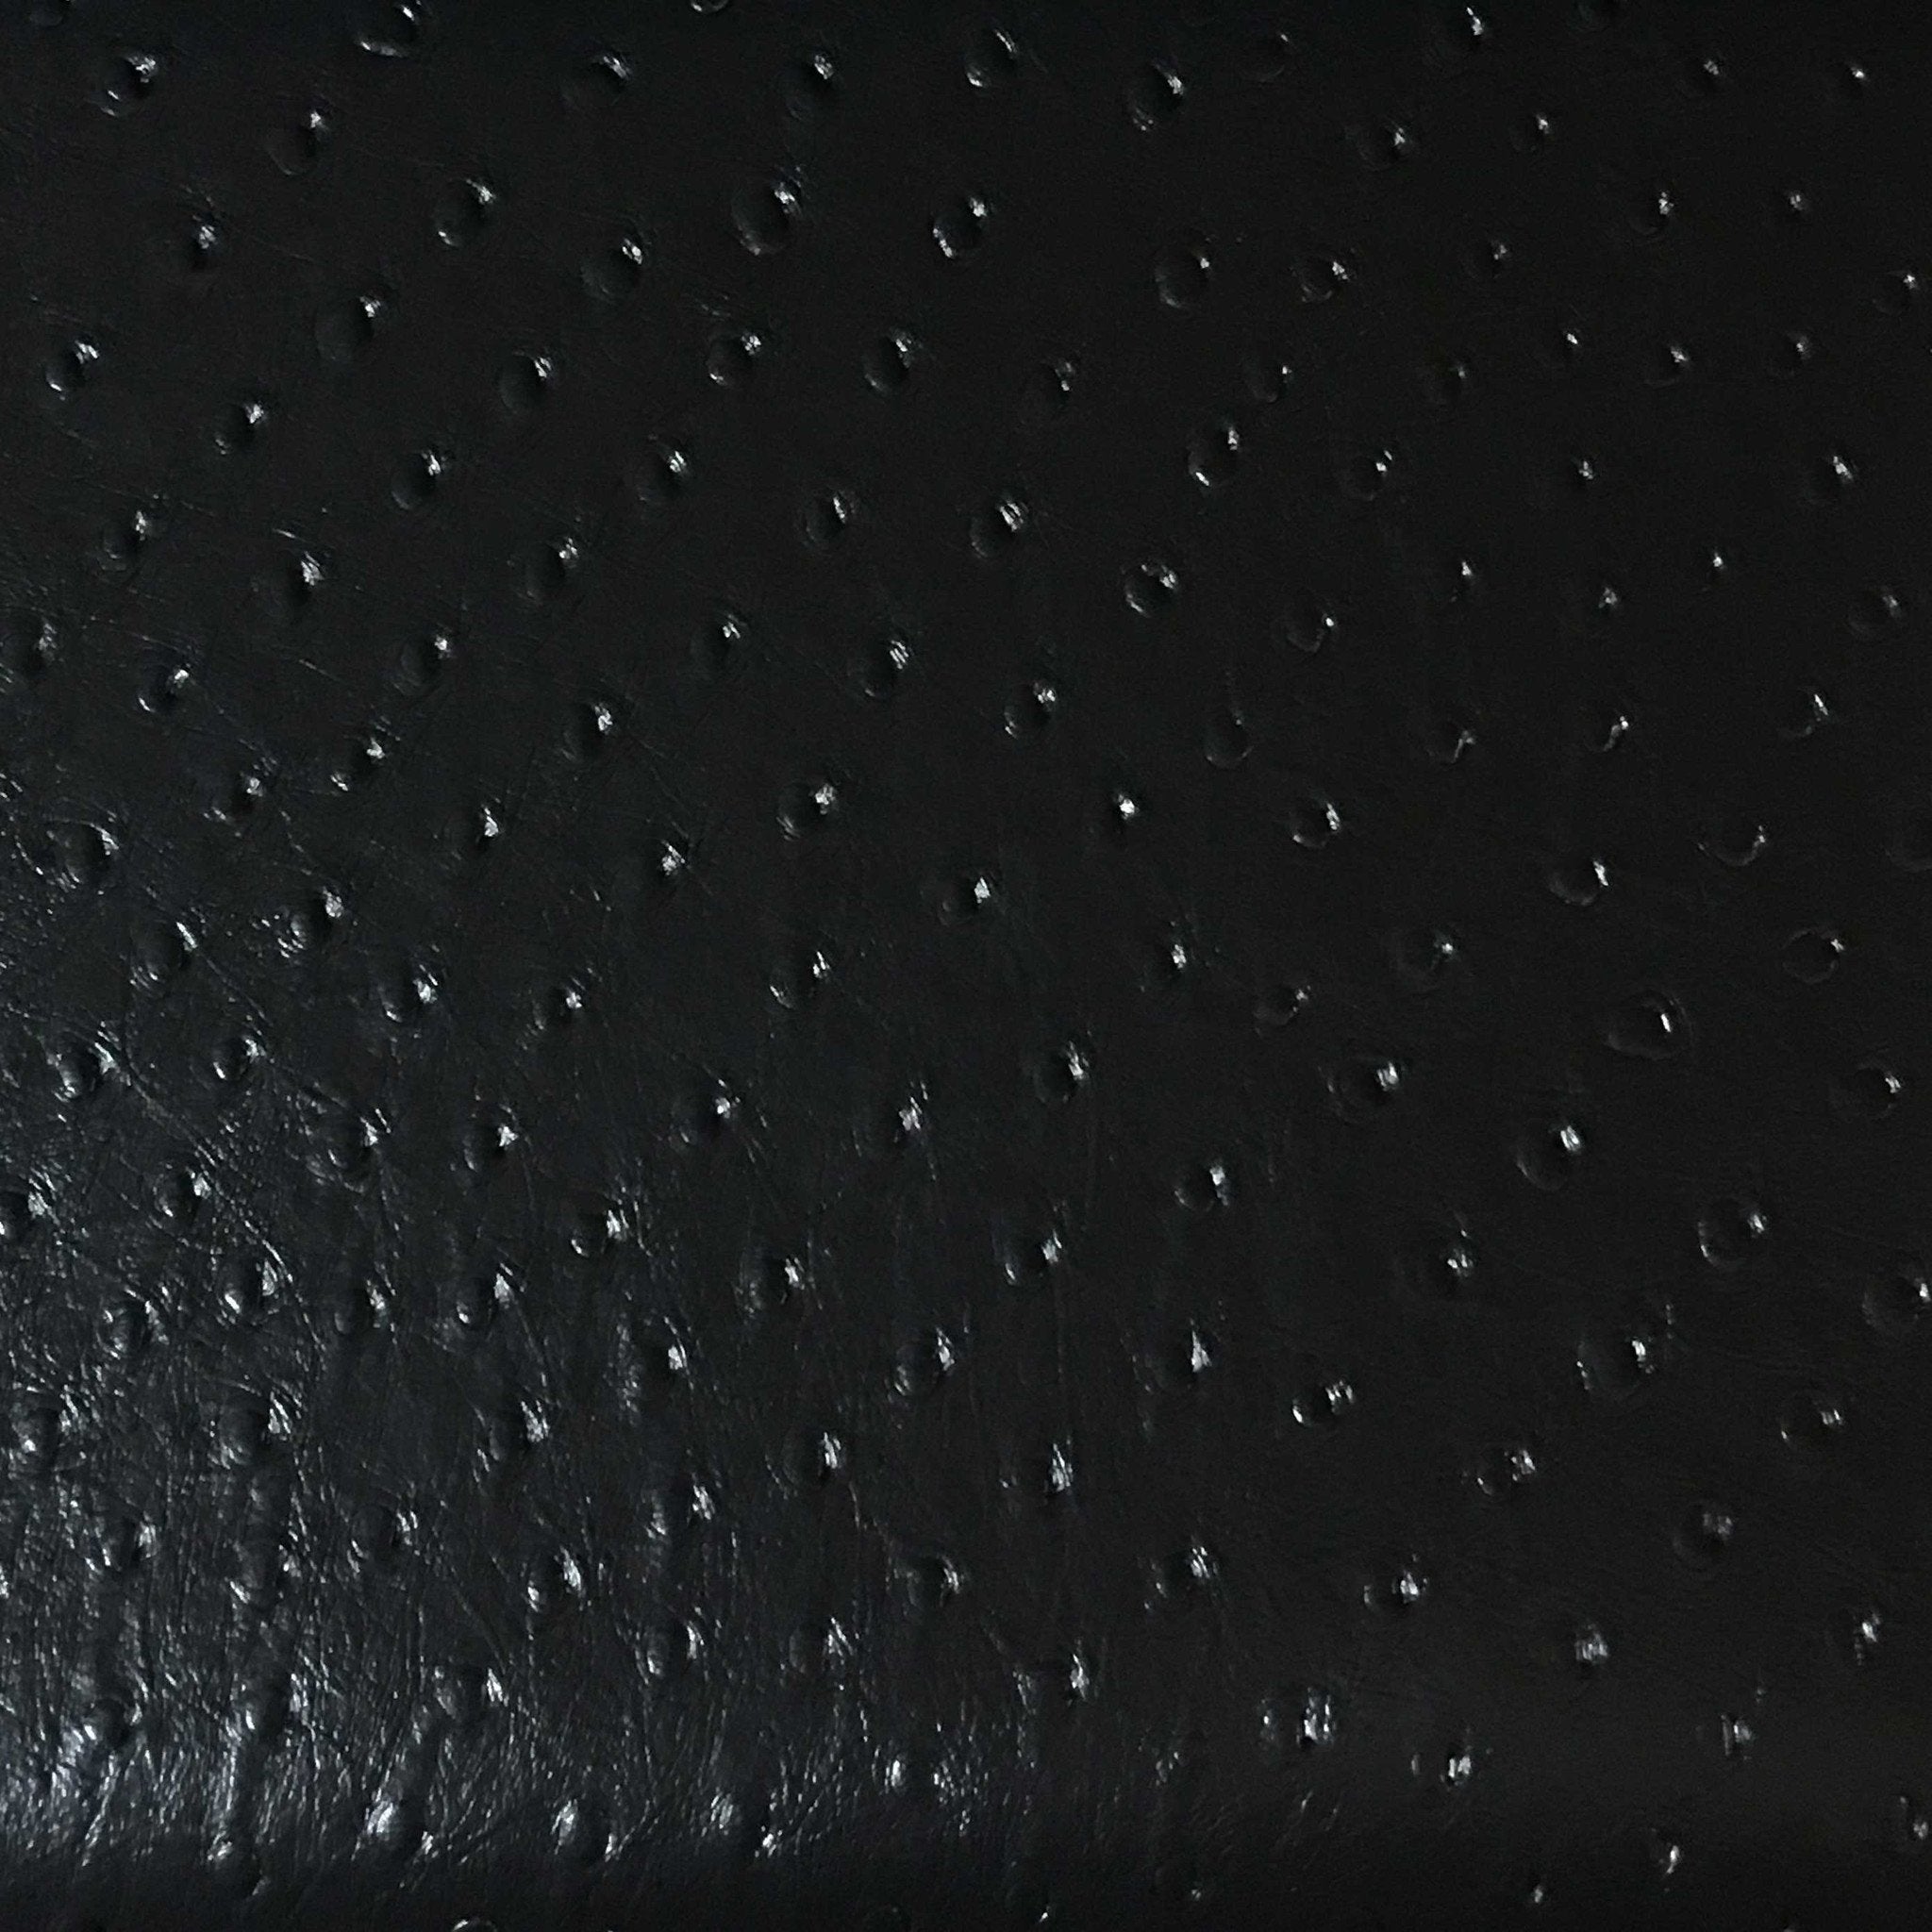 Black Vegan Leather Fabric for Upholstery Faux Leather Fabric in